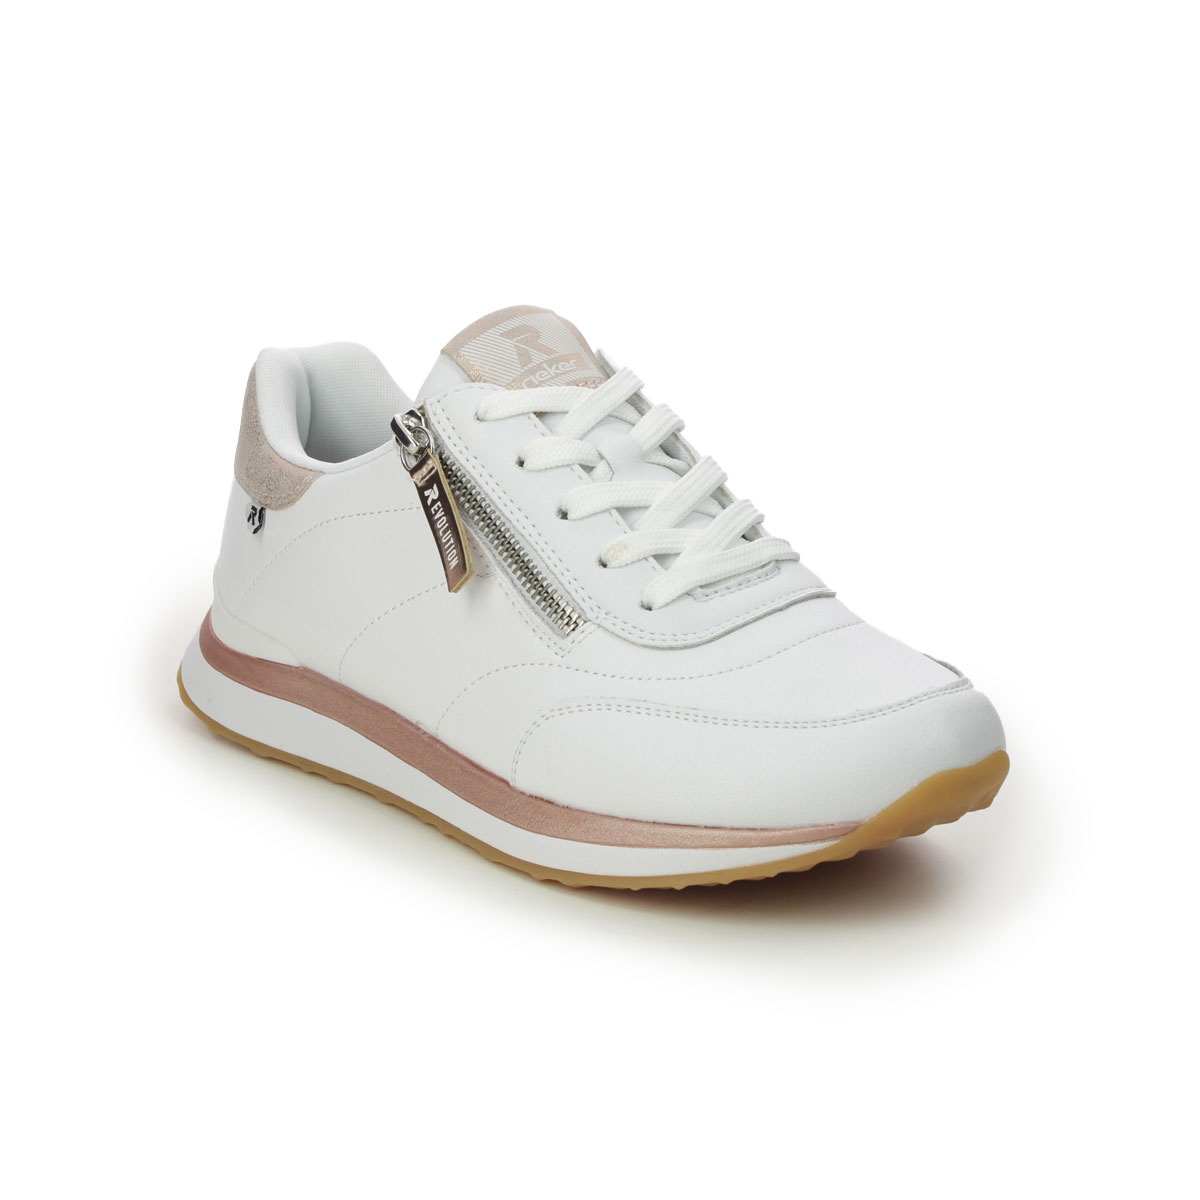 Rieker 42505-80 White Rose Gold Womens trainers in a Plain Leather in Size 37